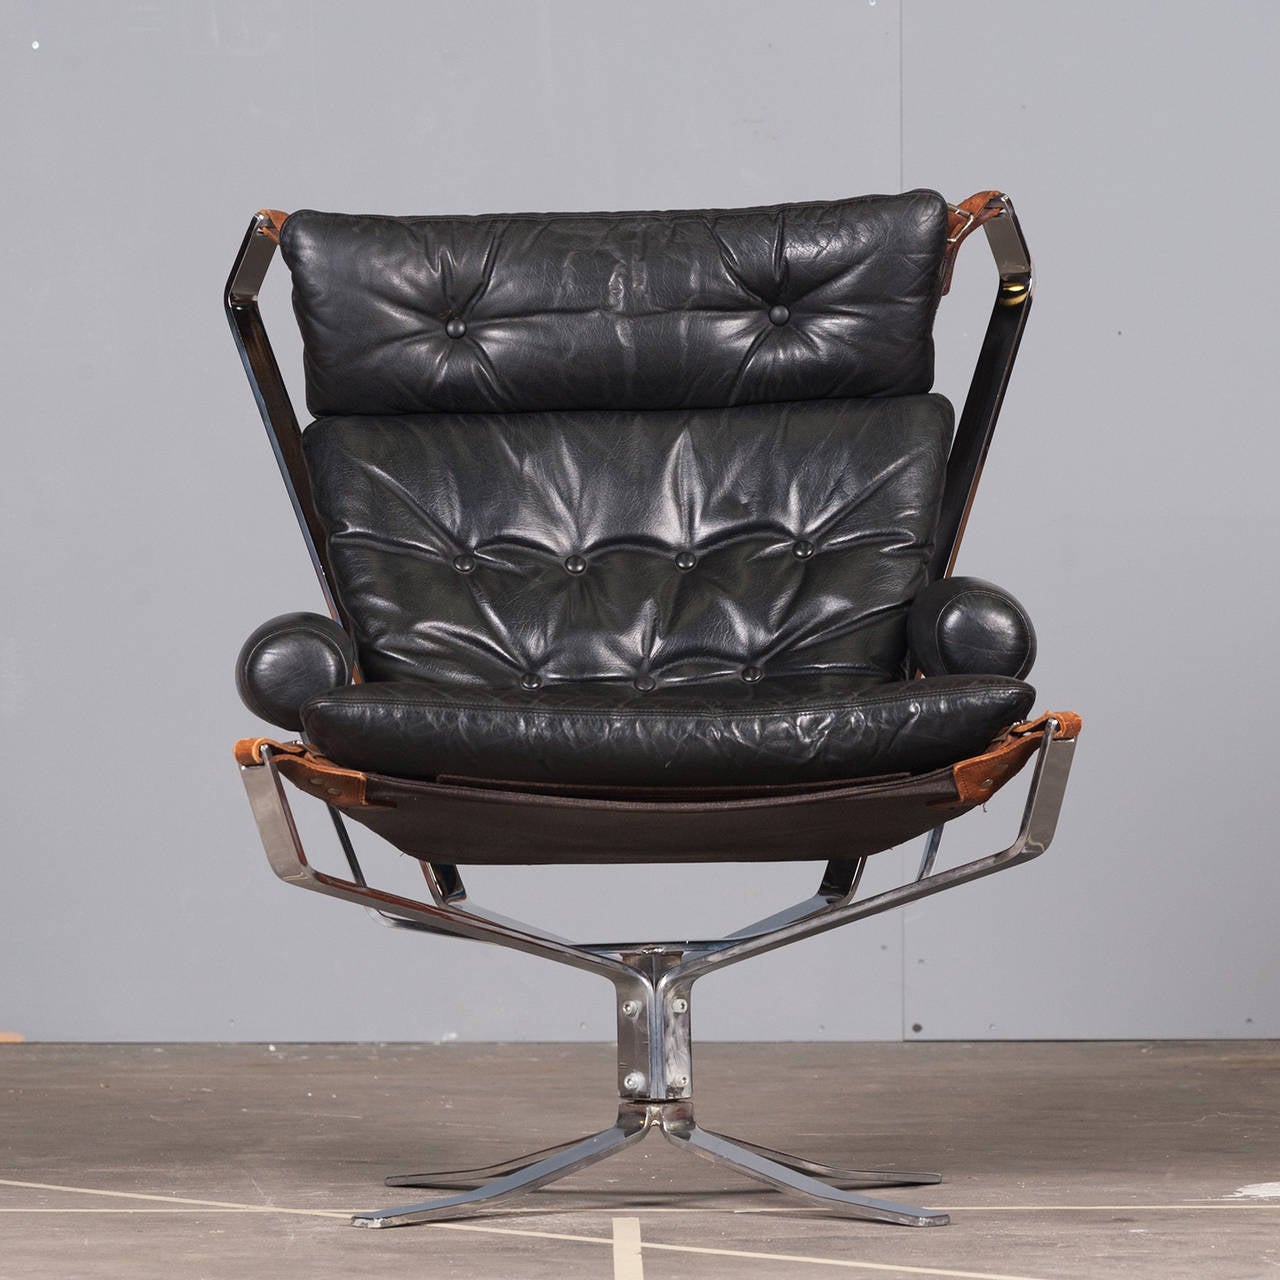 The High Back Falcon Chair is an iconic Norwegian design piece. Originally designed in 1971 and manufactured by Vatne Mobler Norway. With a light appearance, hammock style seat, vintage leather cushioning and solid steel frame, this impressive piece